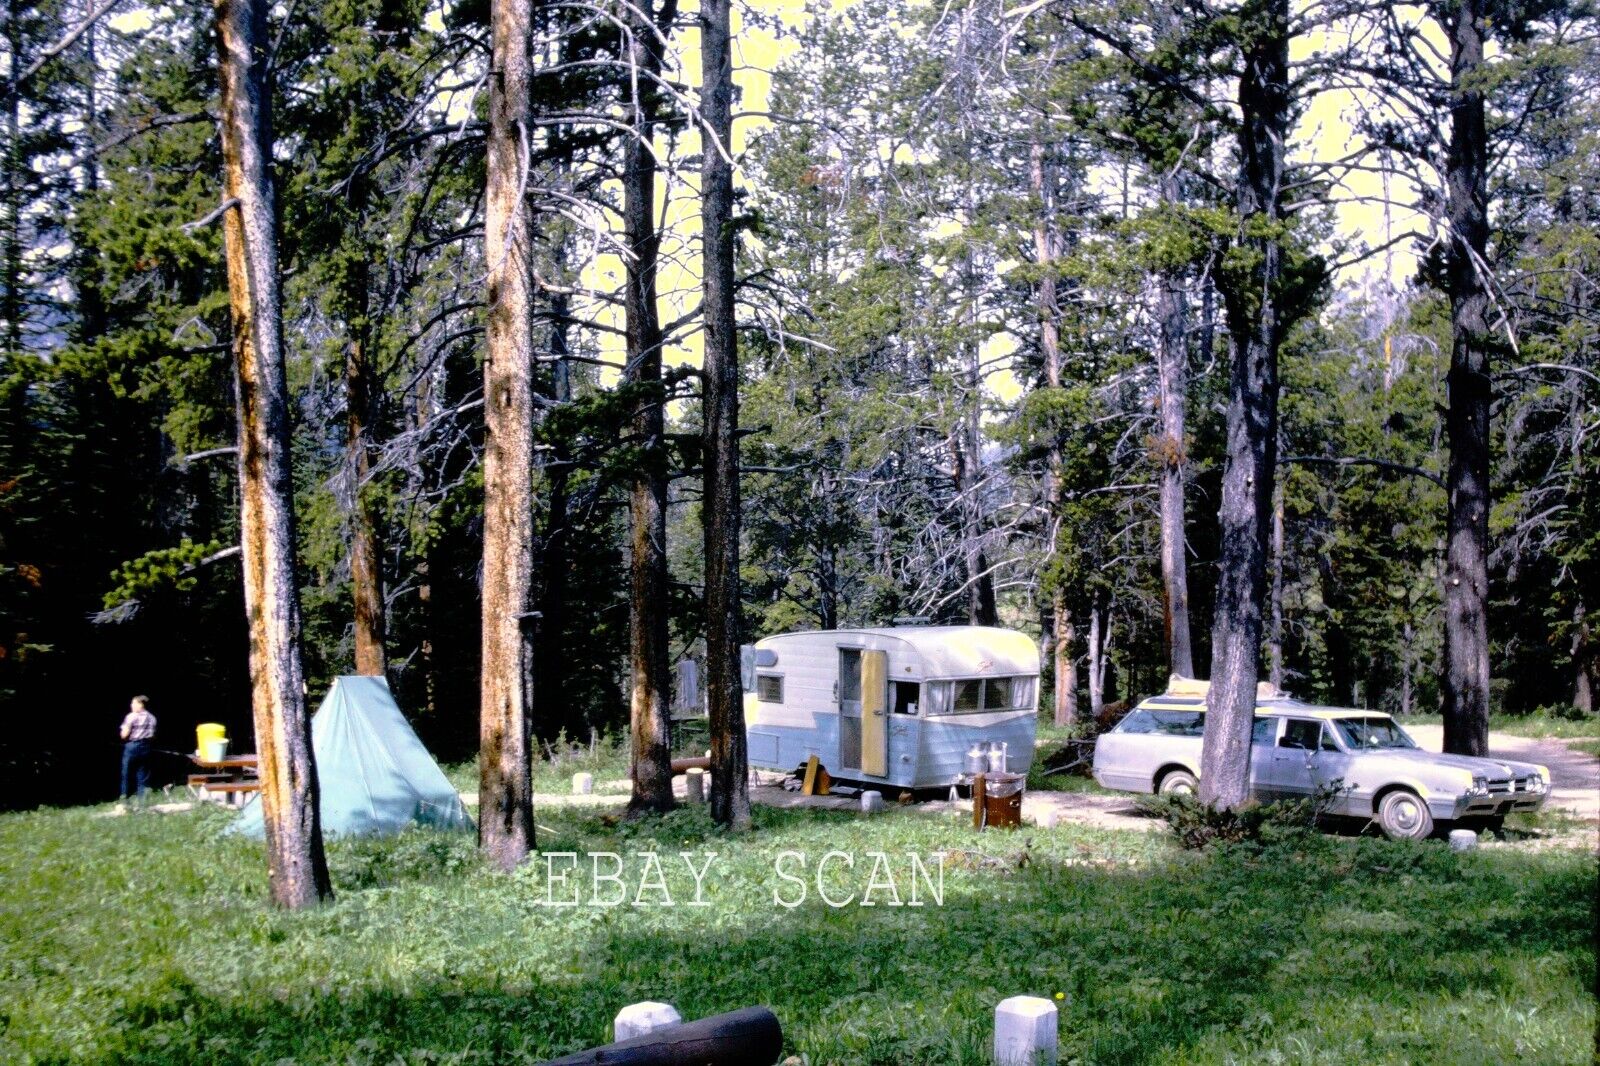 1967 Kodachrome 35mm Slide - Canned Ham - Station Wagon - CAMPING OUT WEST Scene